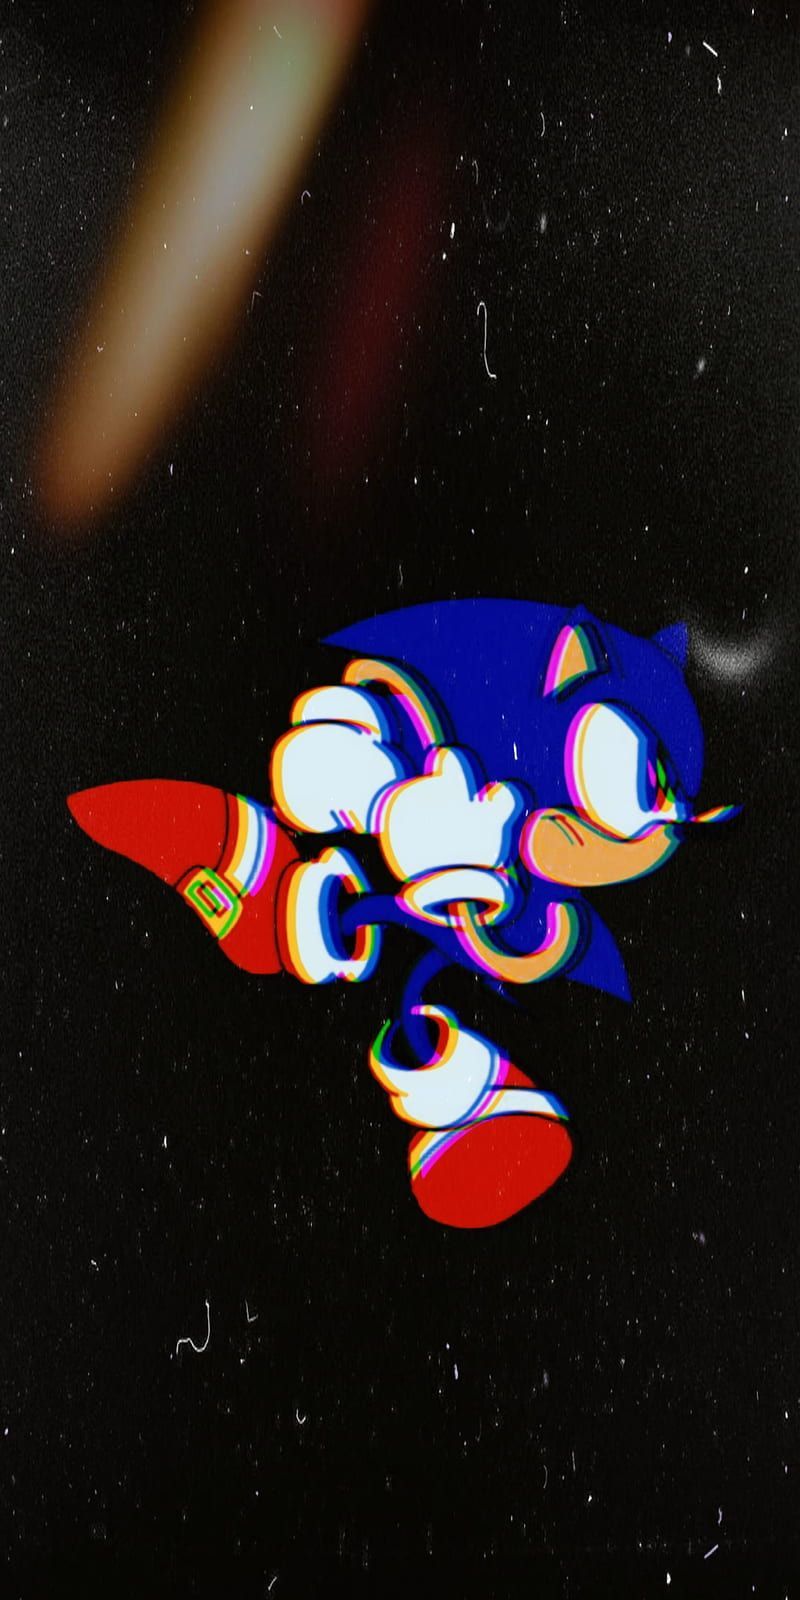 A photo of a colorful image of a hedgehog on a black background - Sonic